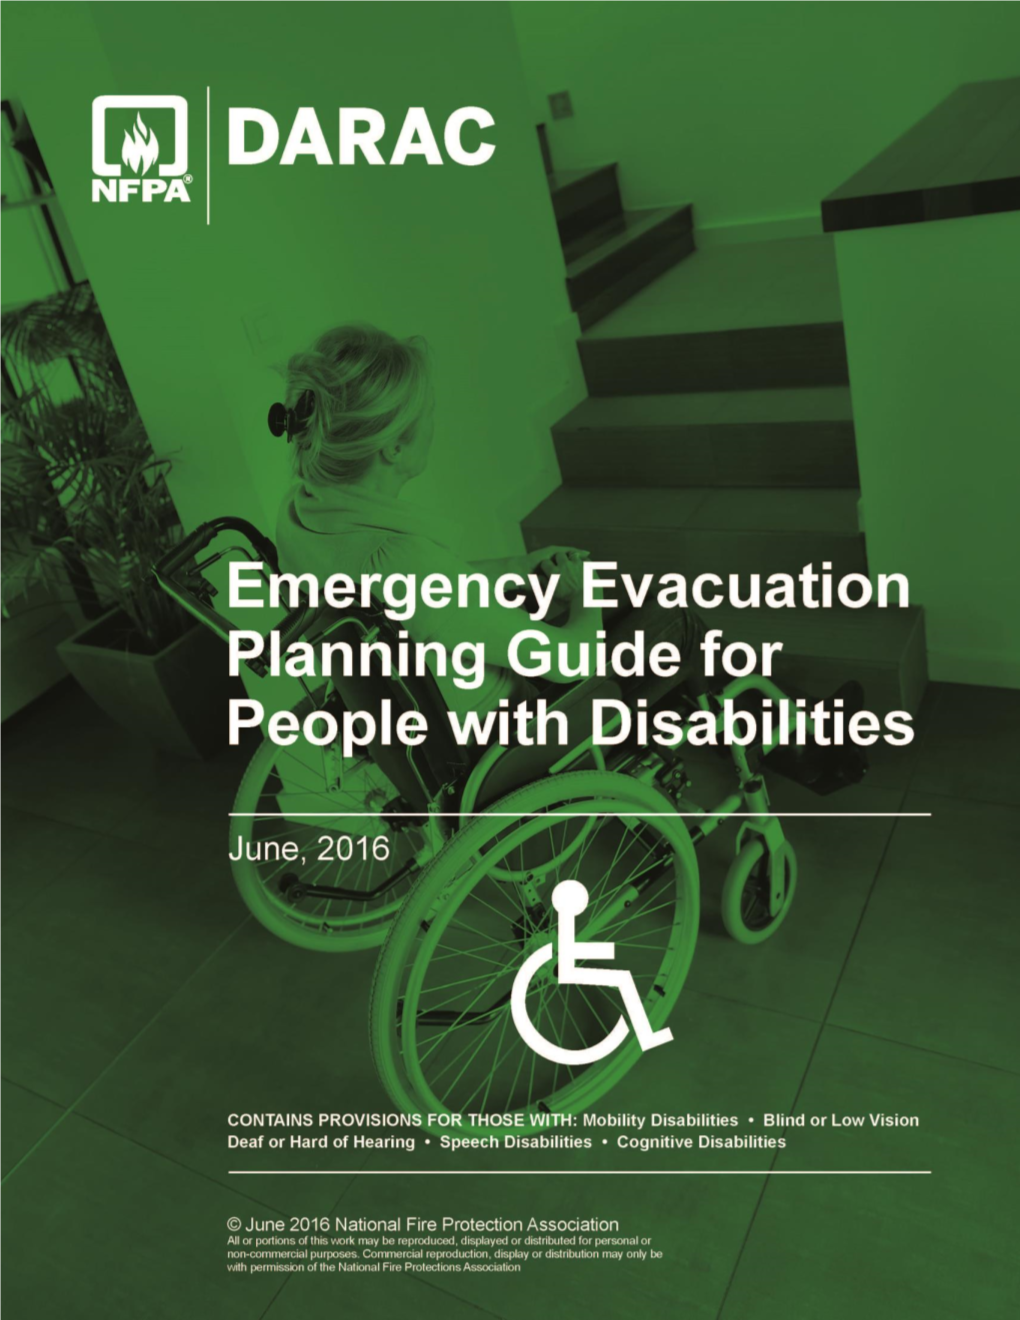 Emergency Evacuation Planning Guide for People with Disabilities Sign up Free NFPA “E-ACCESS” Newsletter @